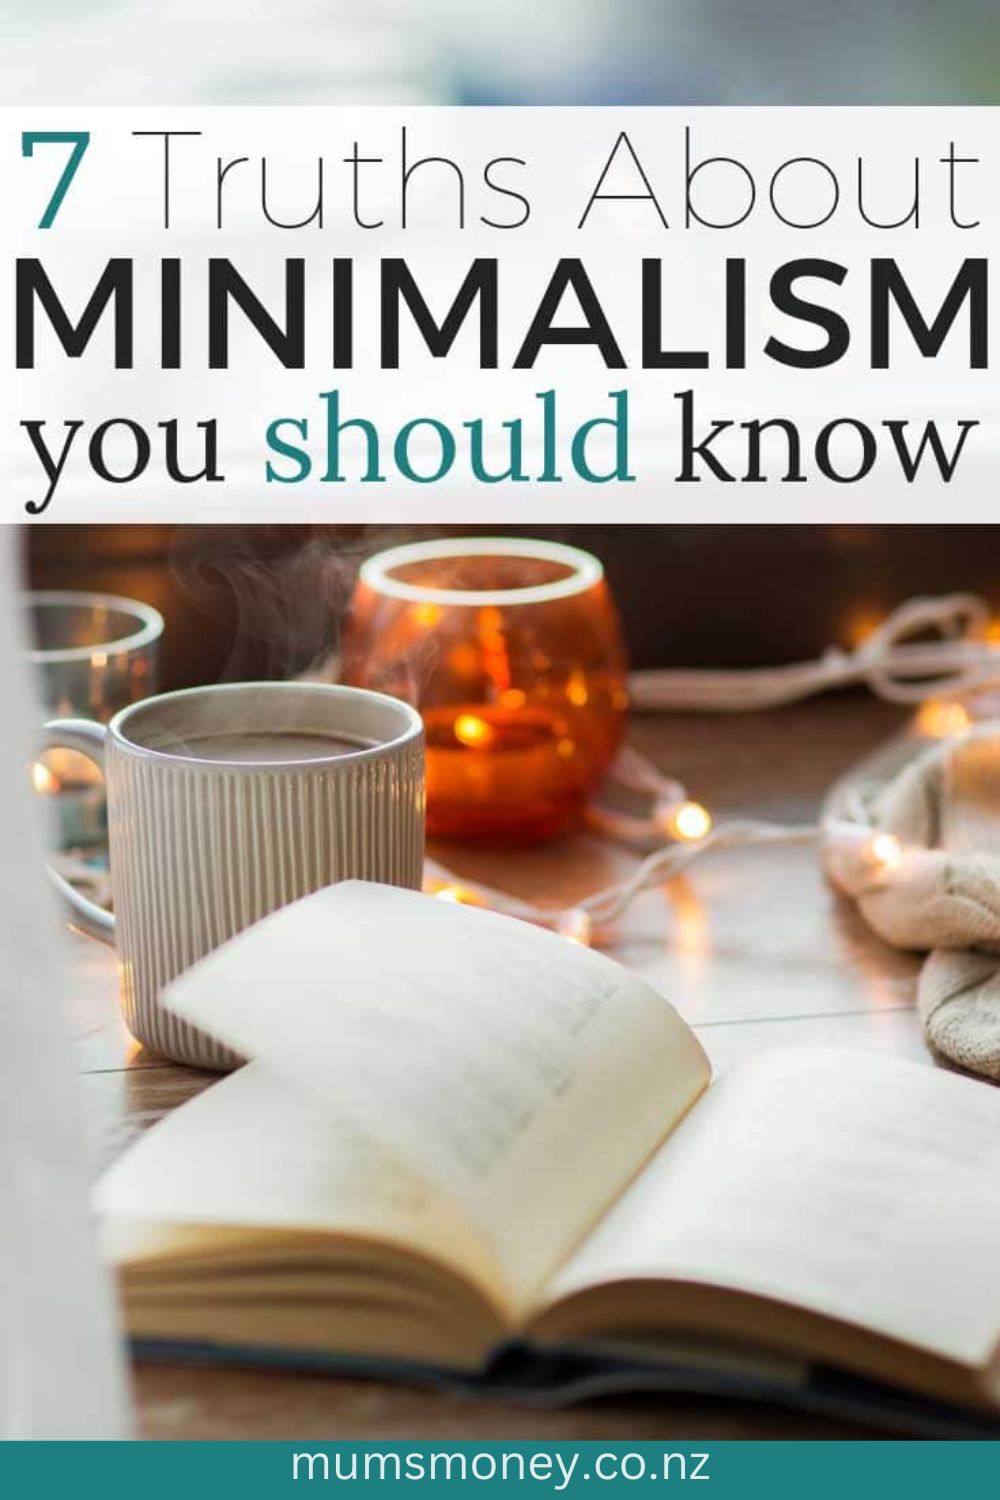 If minimalism is getting you down, you may need a rethink. This realistic approach to minimalism simply takes the best and most relevant parts of the concept and applies them where it can. Minimalist living isn't a prescription, apply the minimalism tips that best suit your life and ignore the rest.